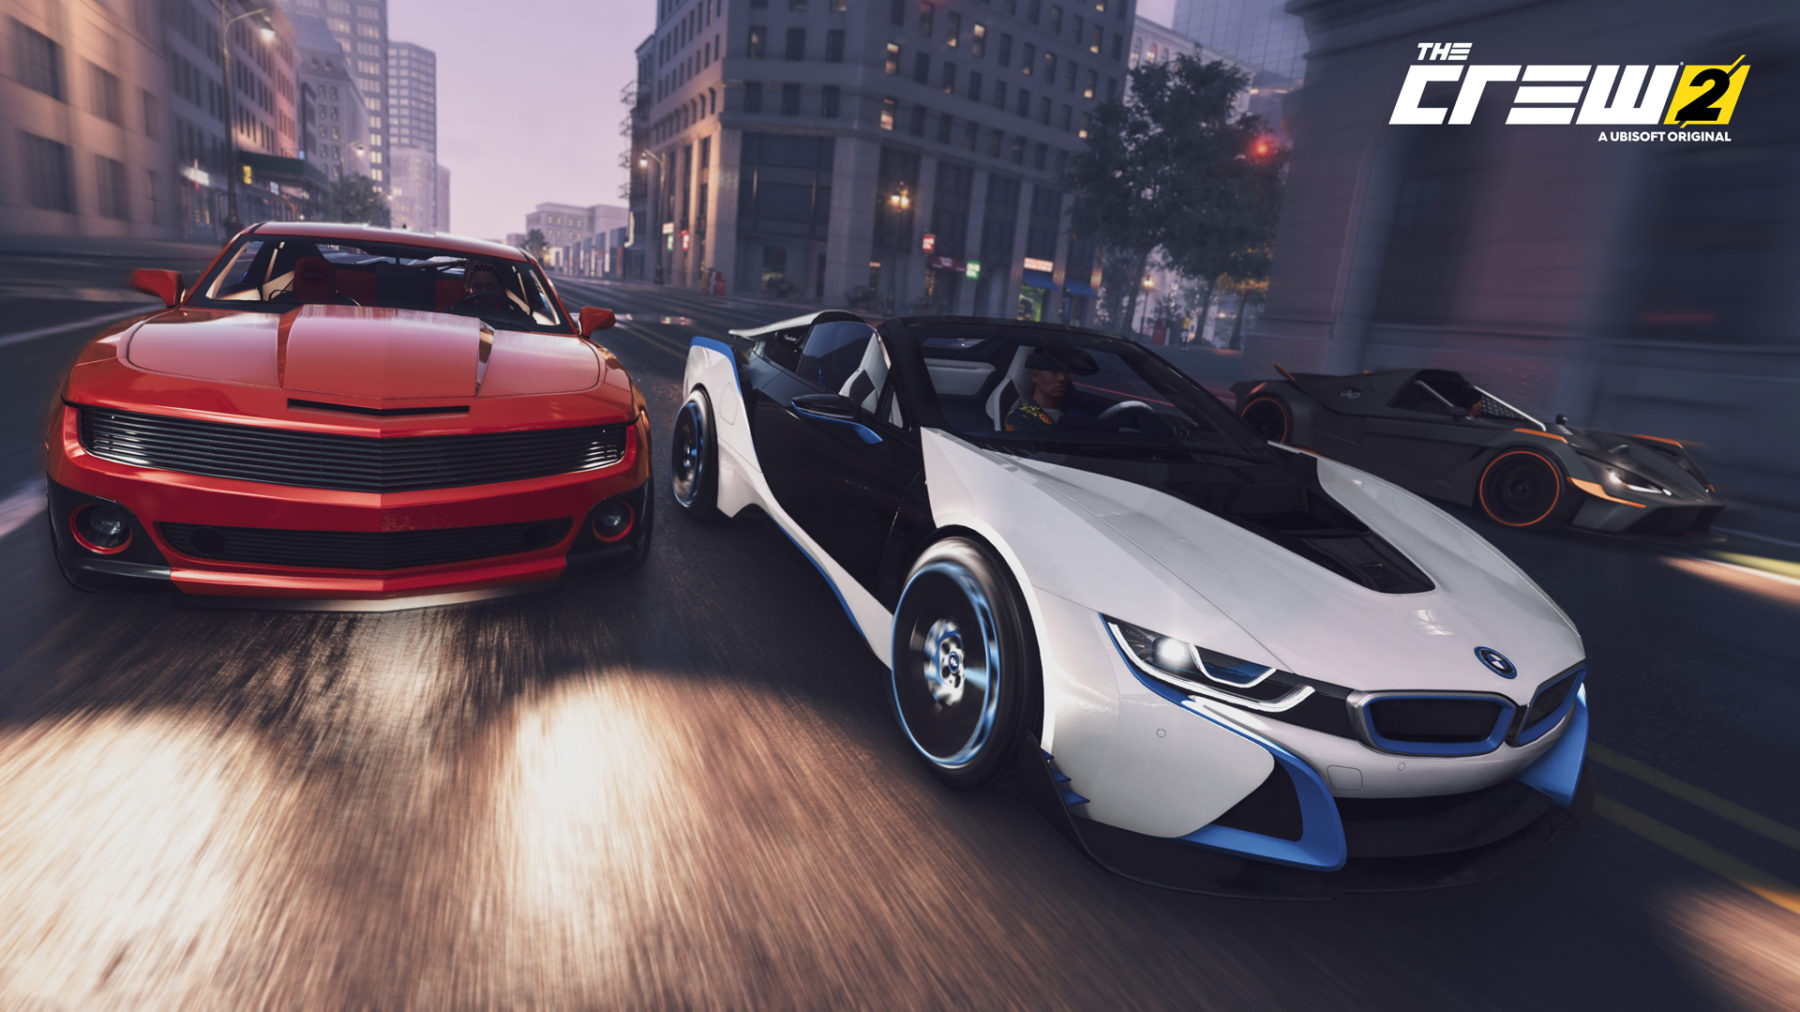 Second Episode of The Crew 2 Season Five Now Available Via Free Update -